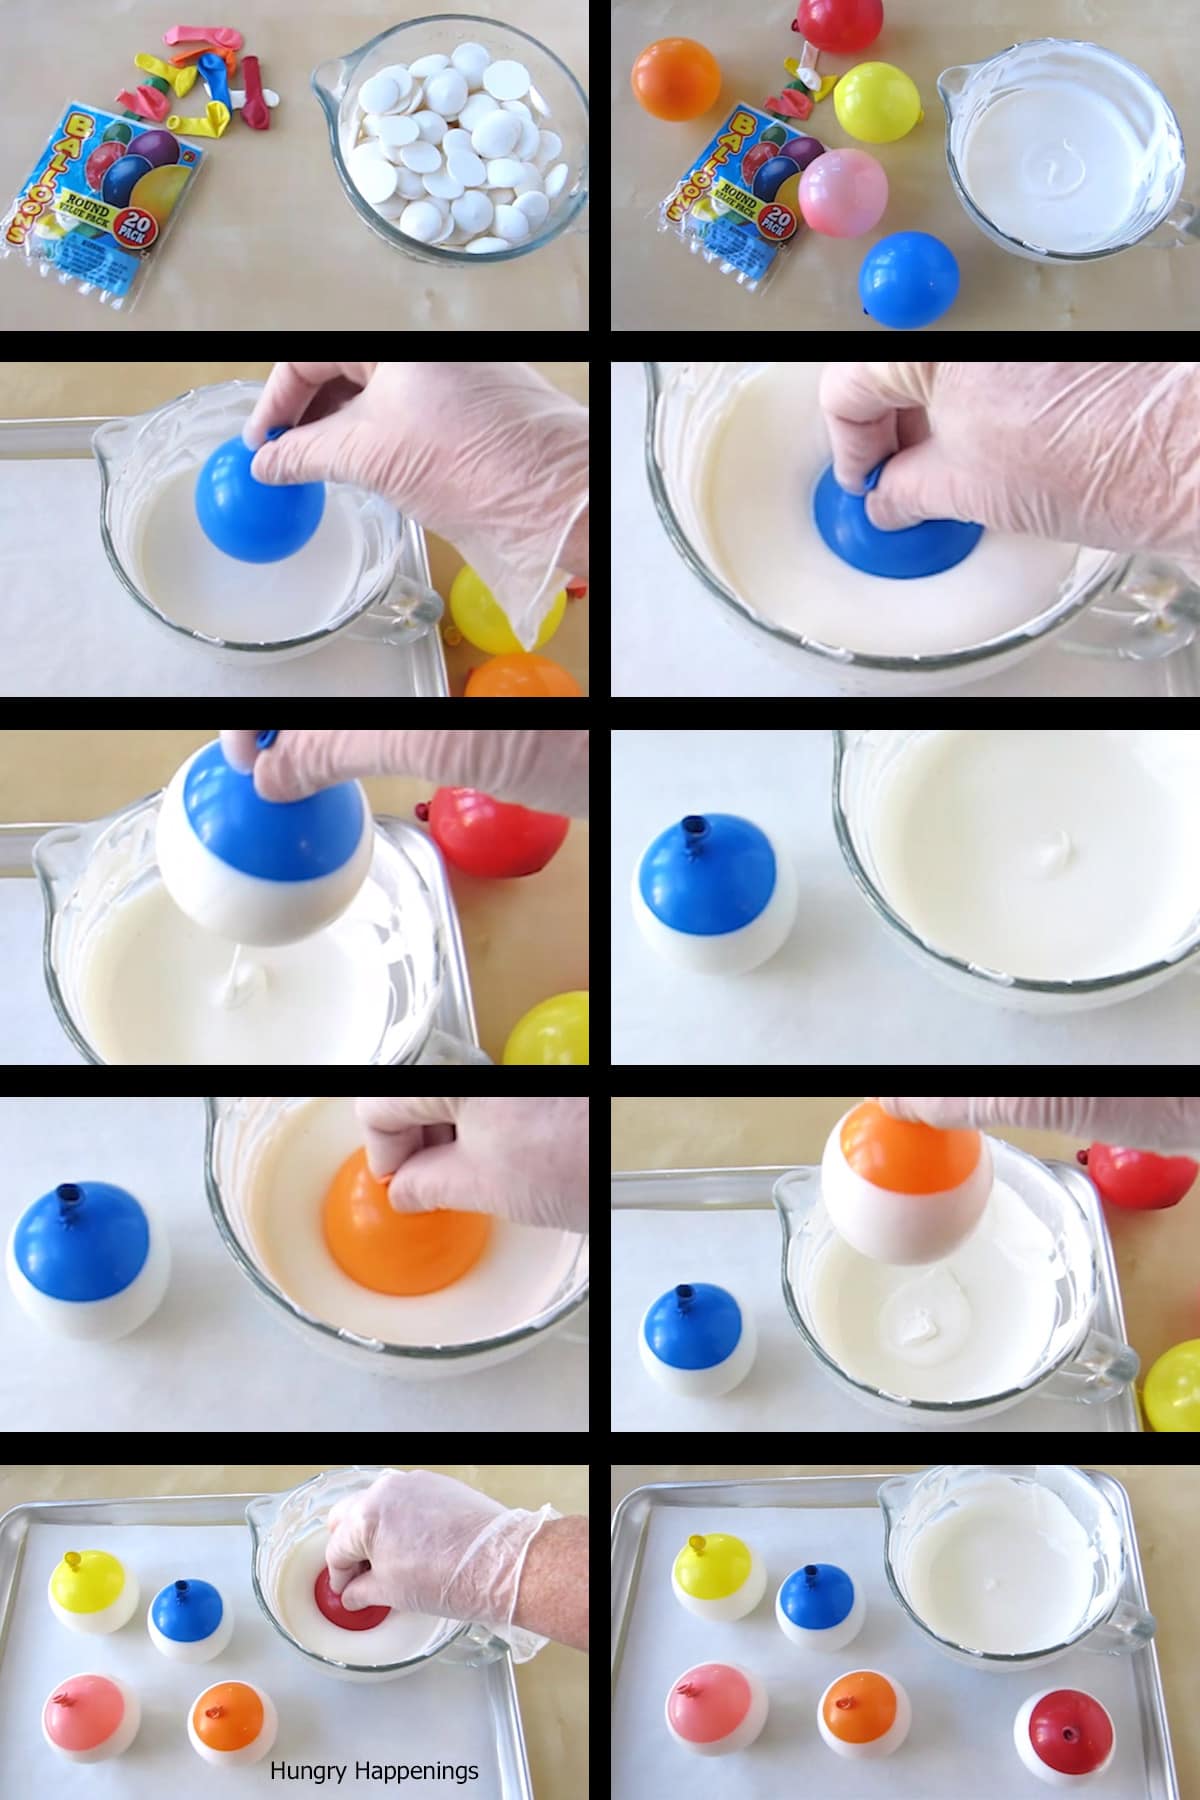 Making chocolate bowls by dipping small round balloons into melted white chocolate. 